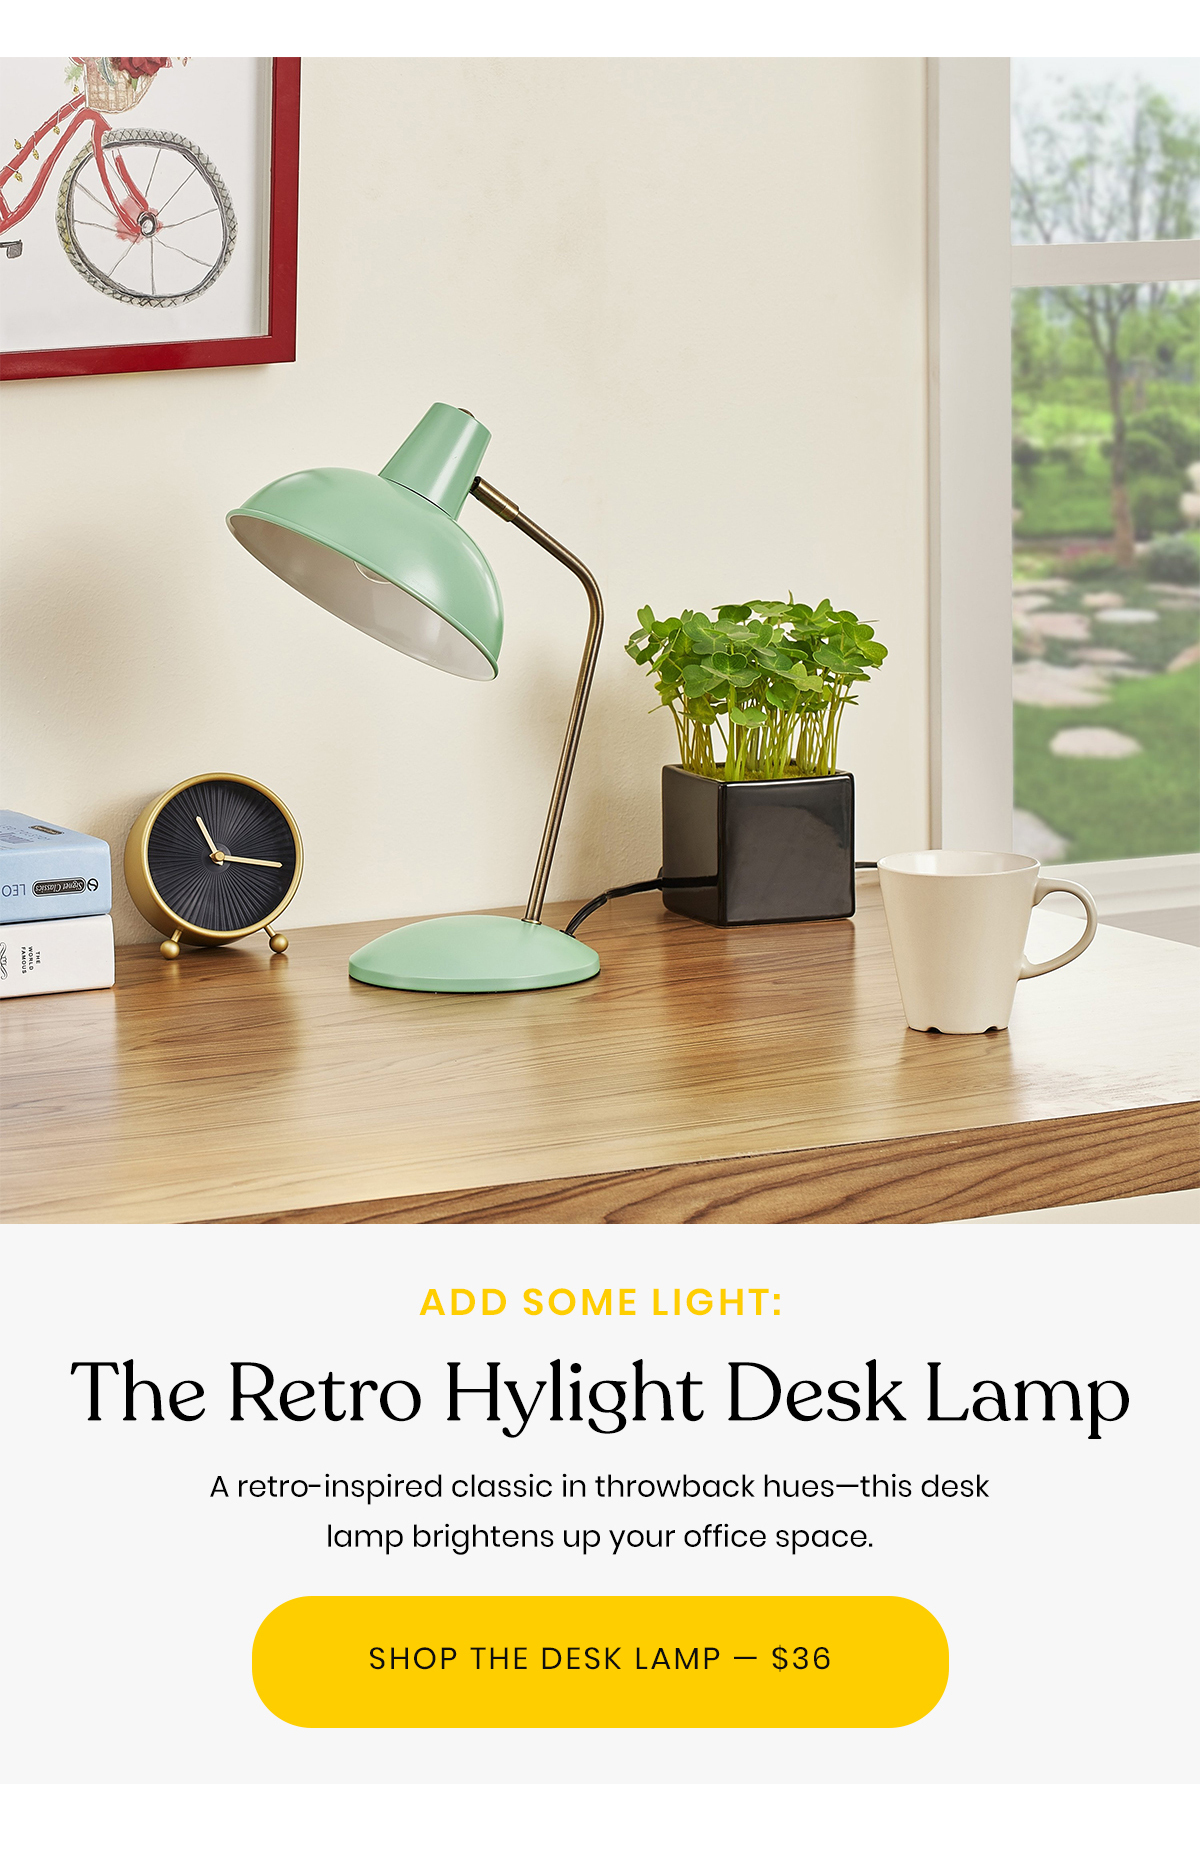 Add Some Light: The Retro Hylight Desk Lamp | A retro-inspired classic in throwback hues - this desk lamp brightens up your office space. | Shop The Desk Lamp - $36